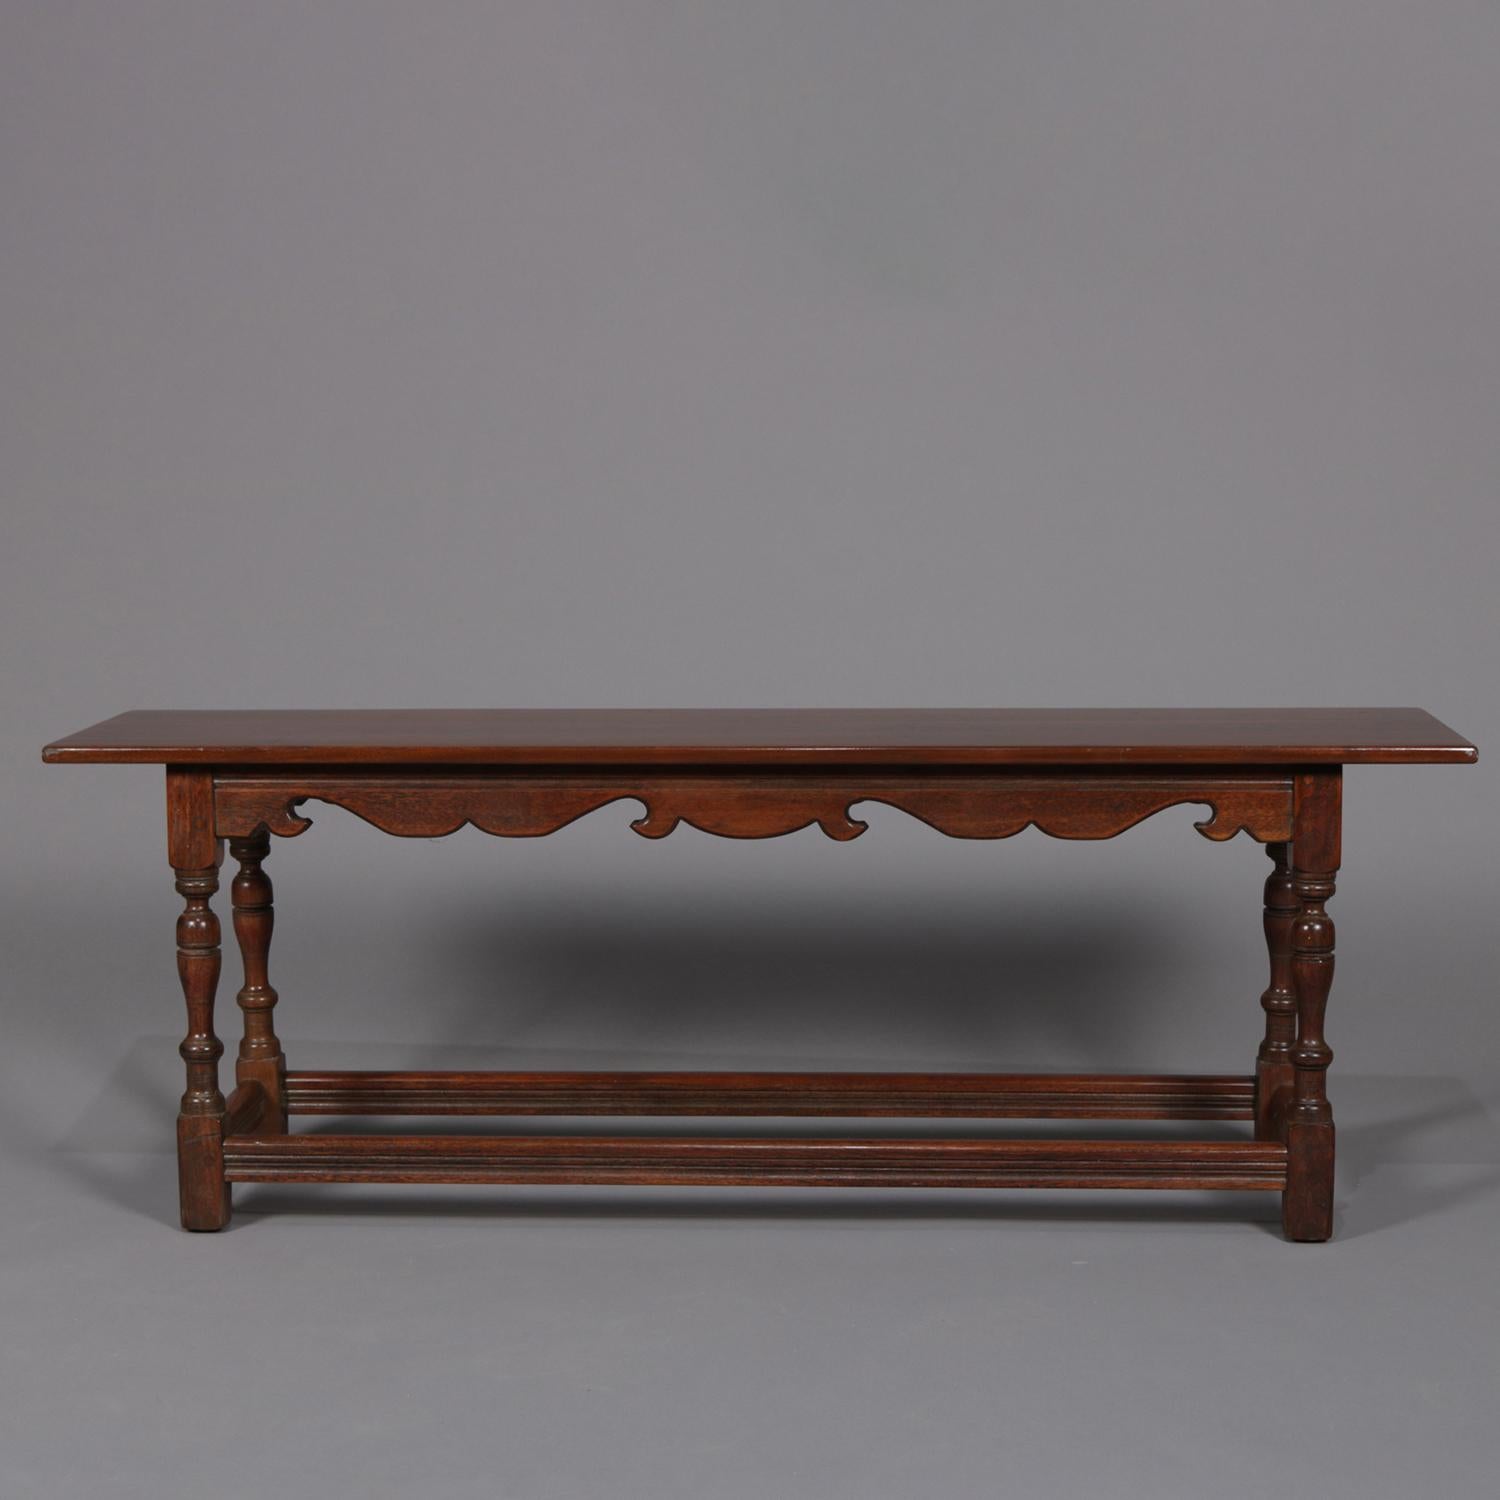 American Colonial Revival Kittinger School Cherry and Pegged Long Bench, circa 1930